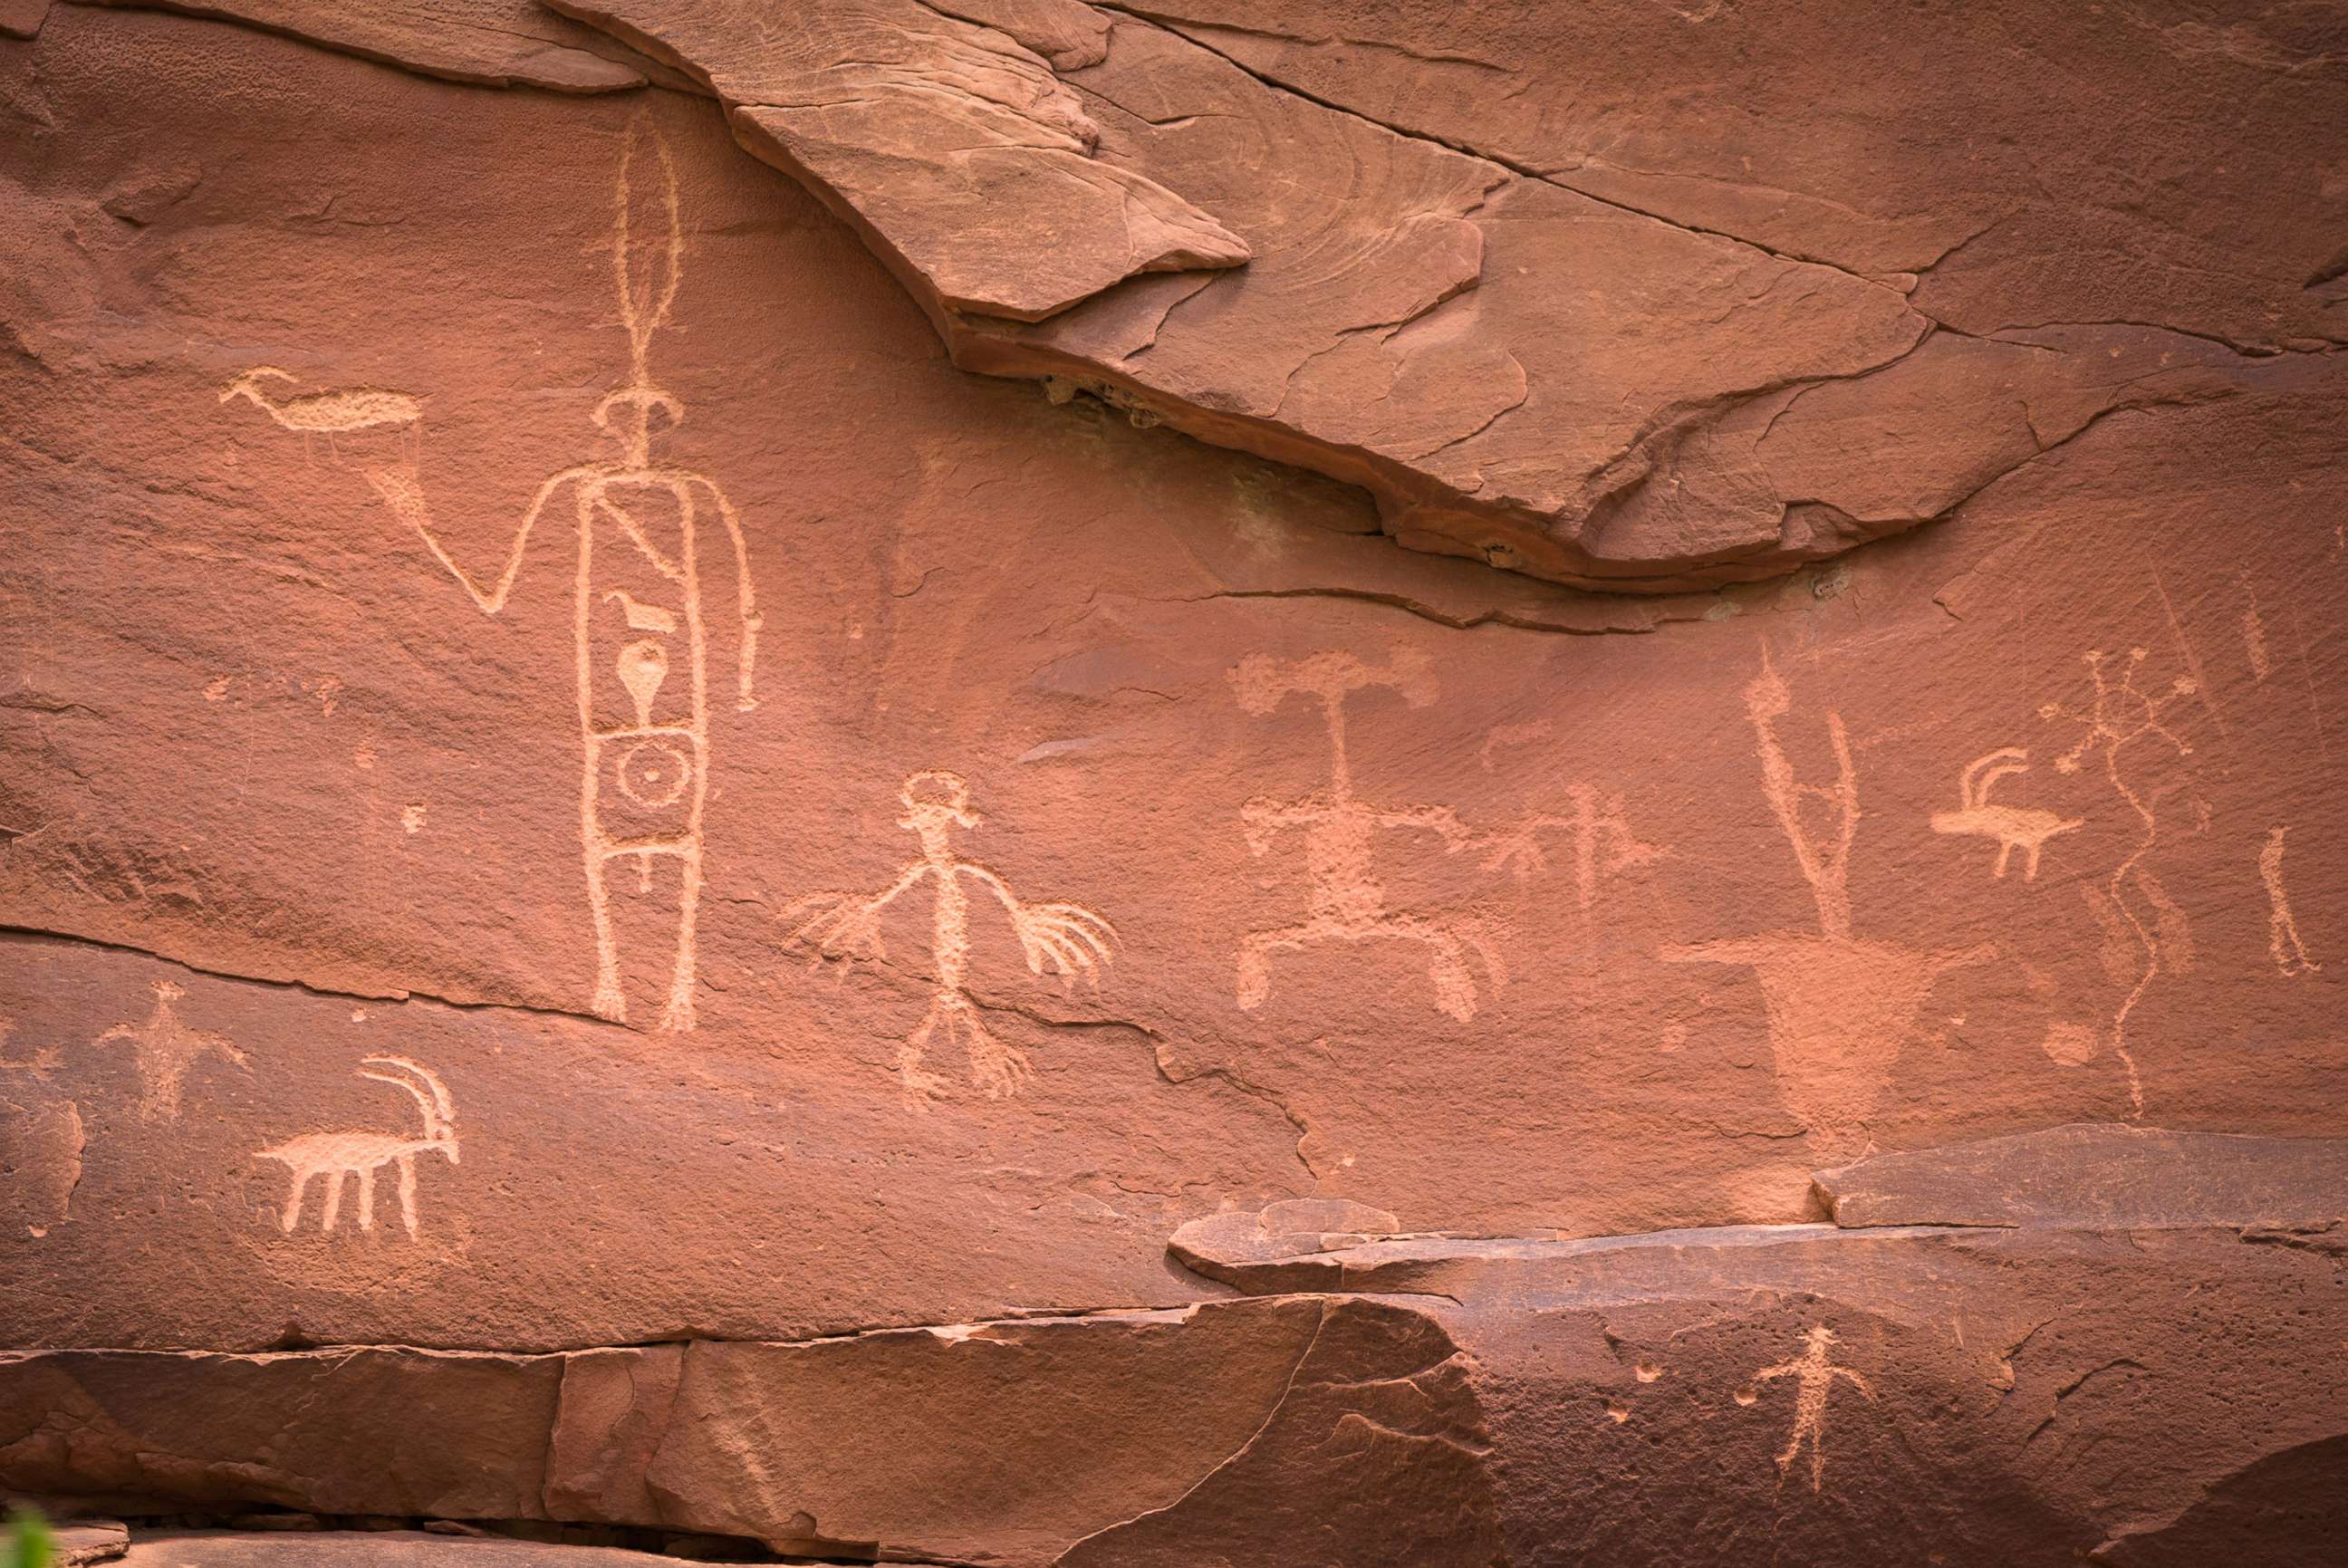 PHOTO: Petroglyphs in Comb Wash, near the Comb Ridge area of Bears Ears National Monument.